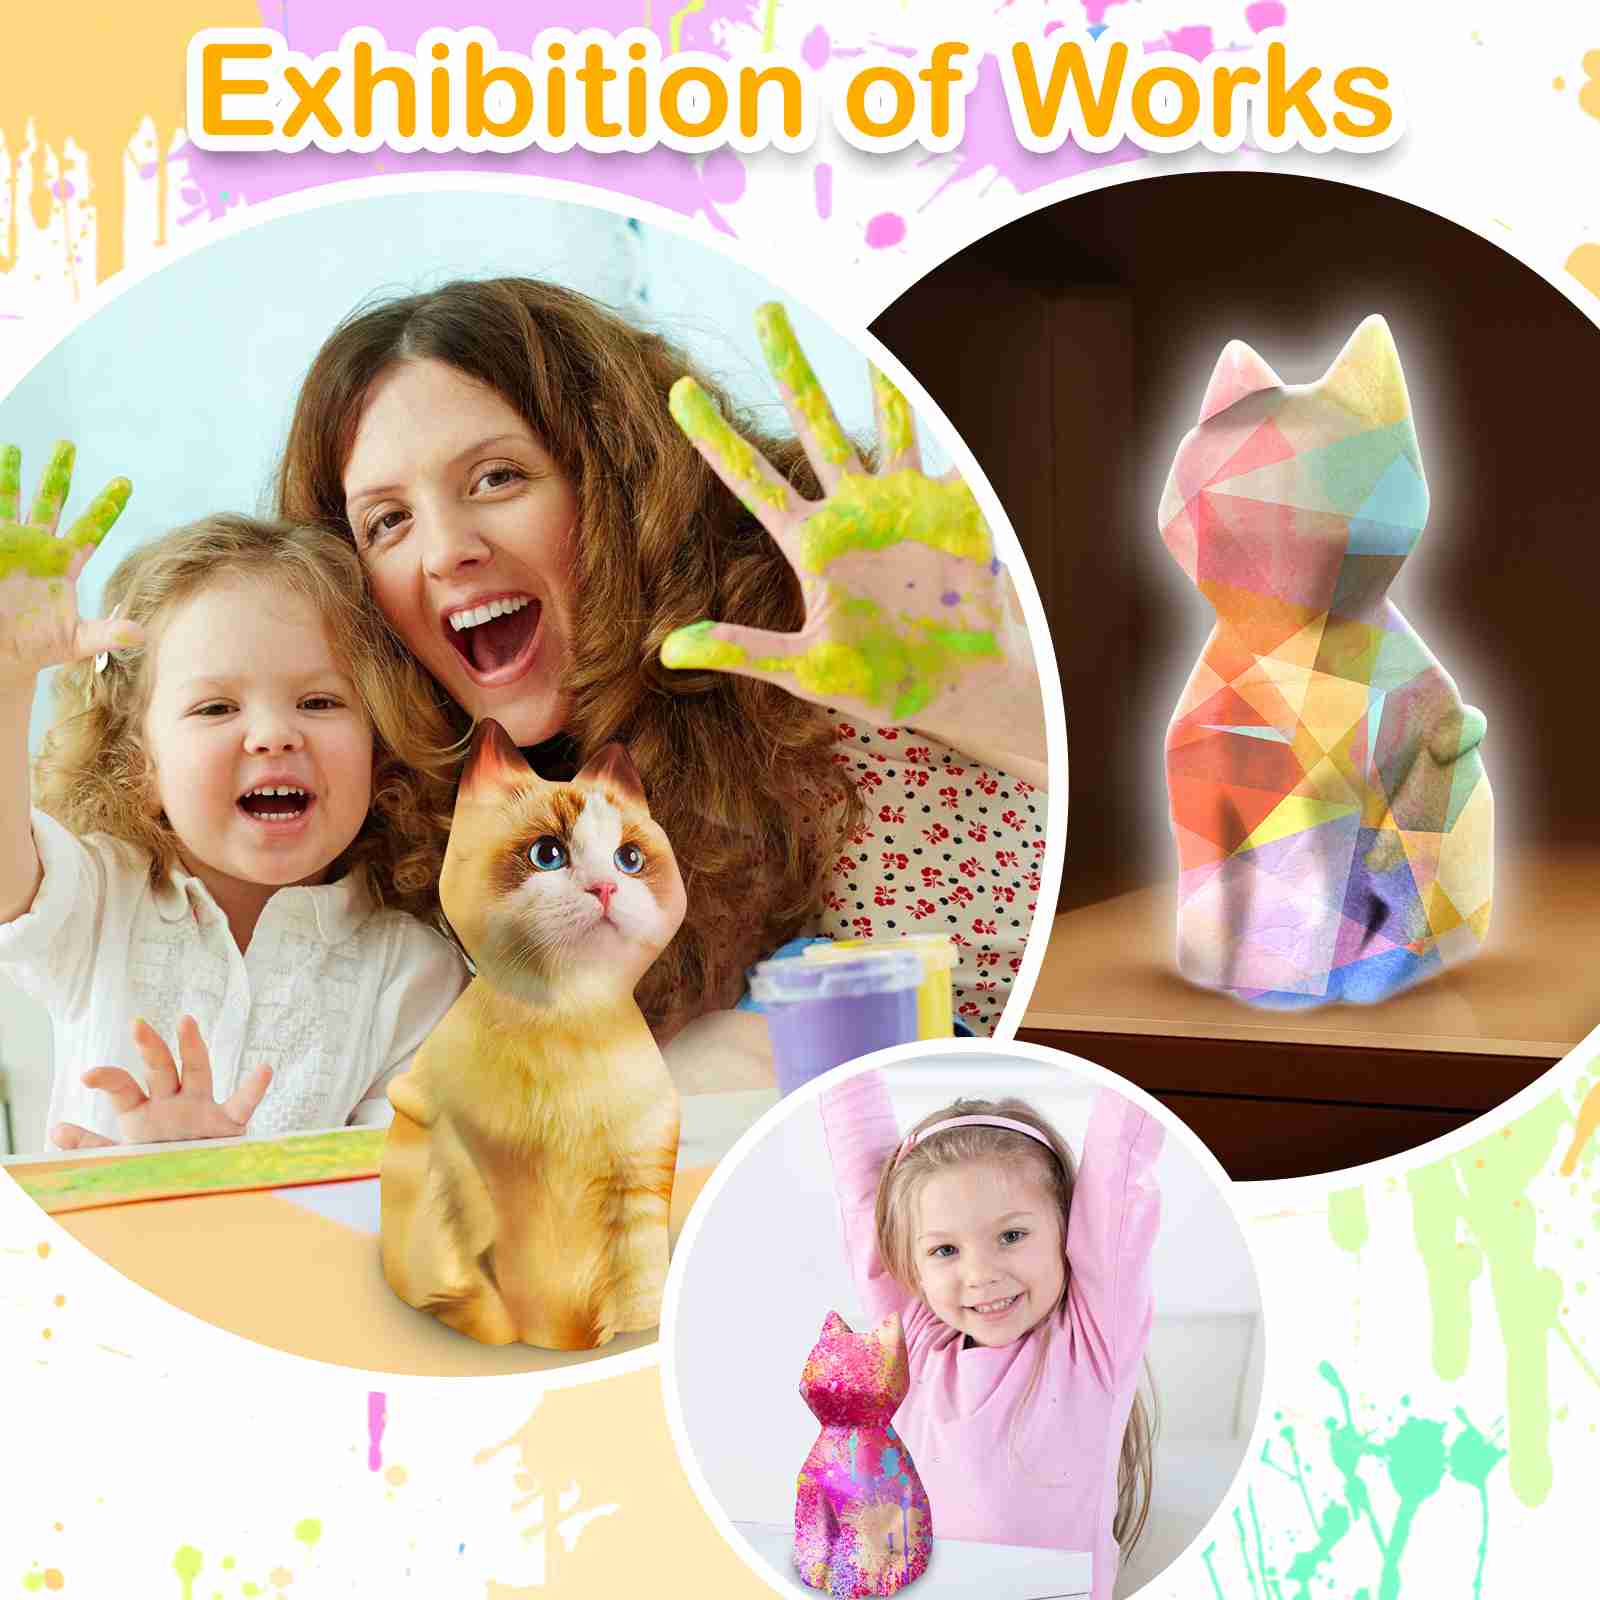 cat-lamp-cat-crafts-girls-toys-8-10 with discount code